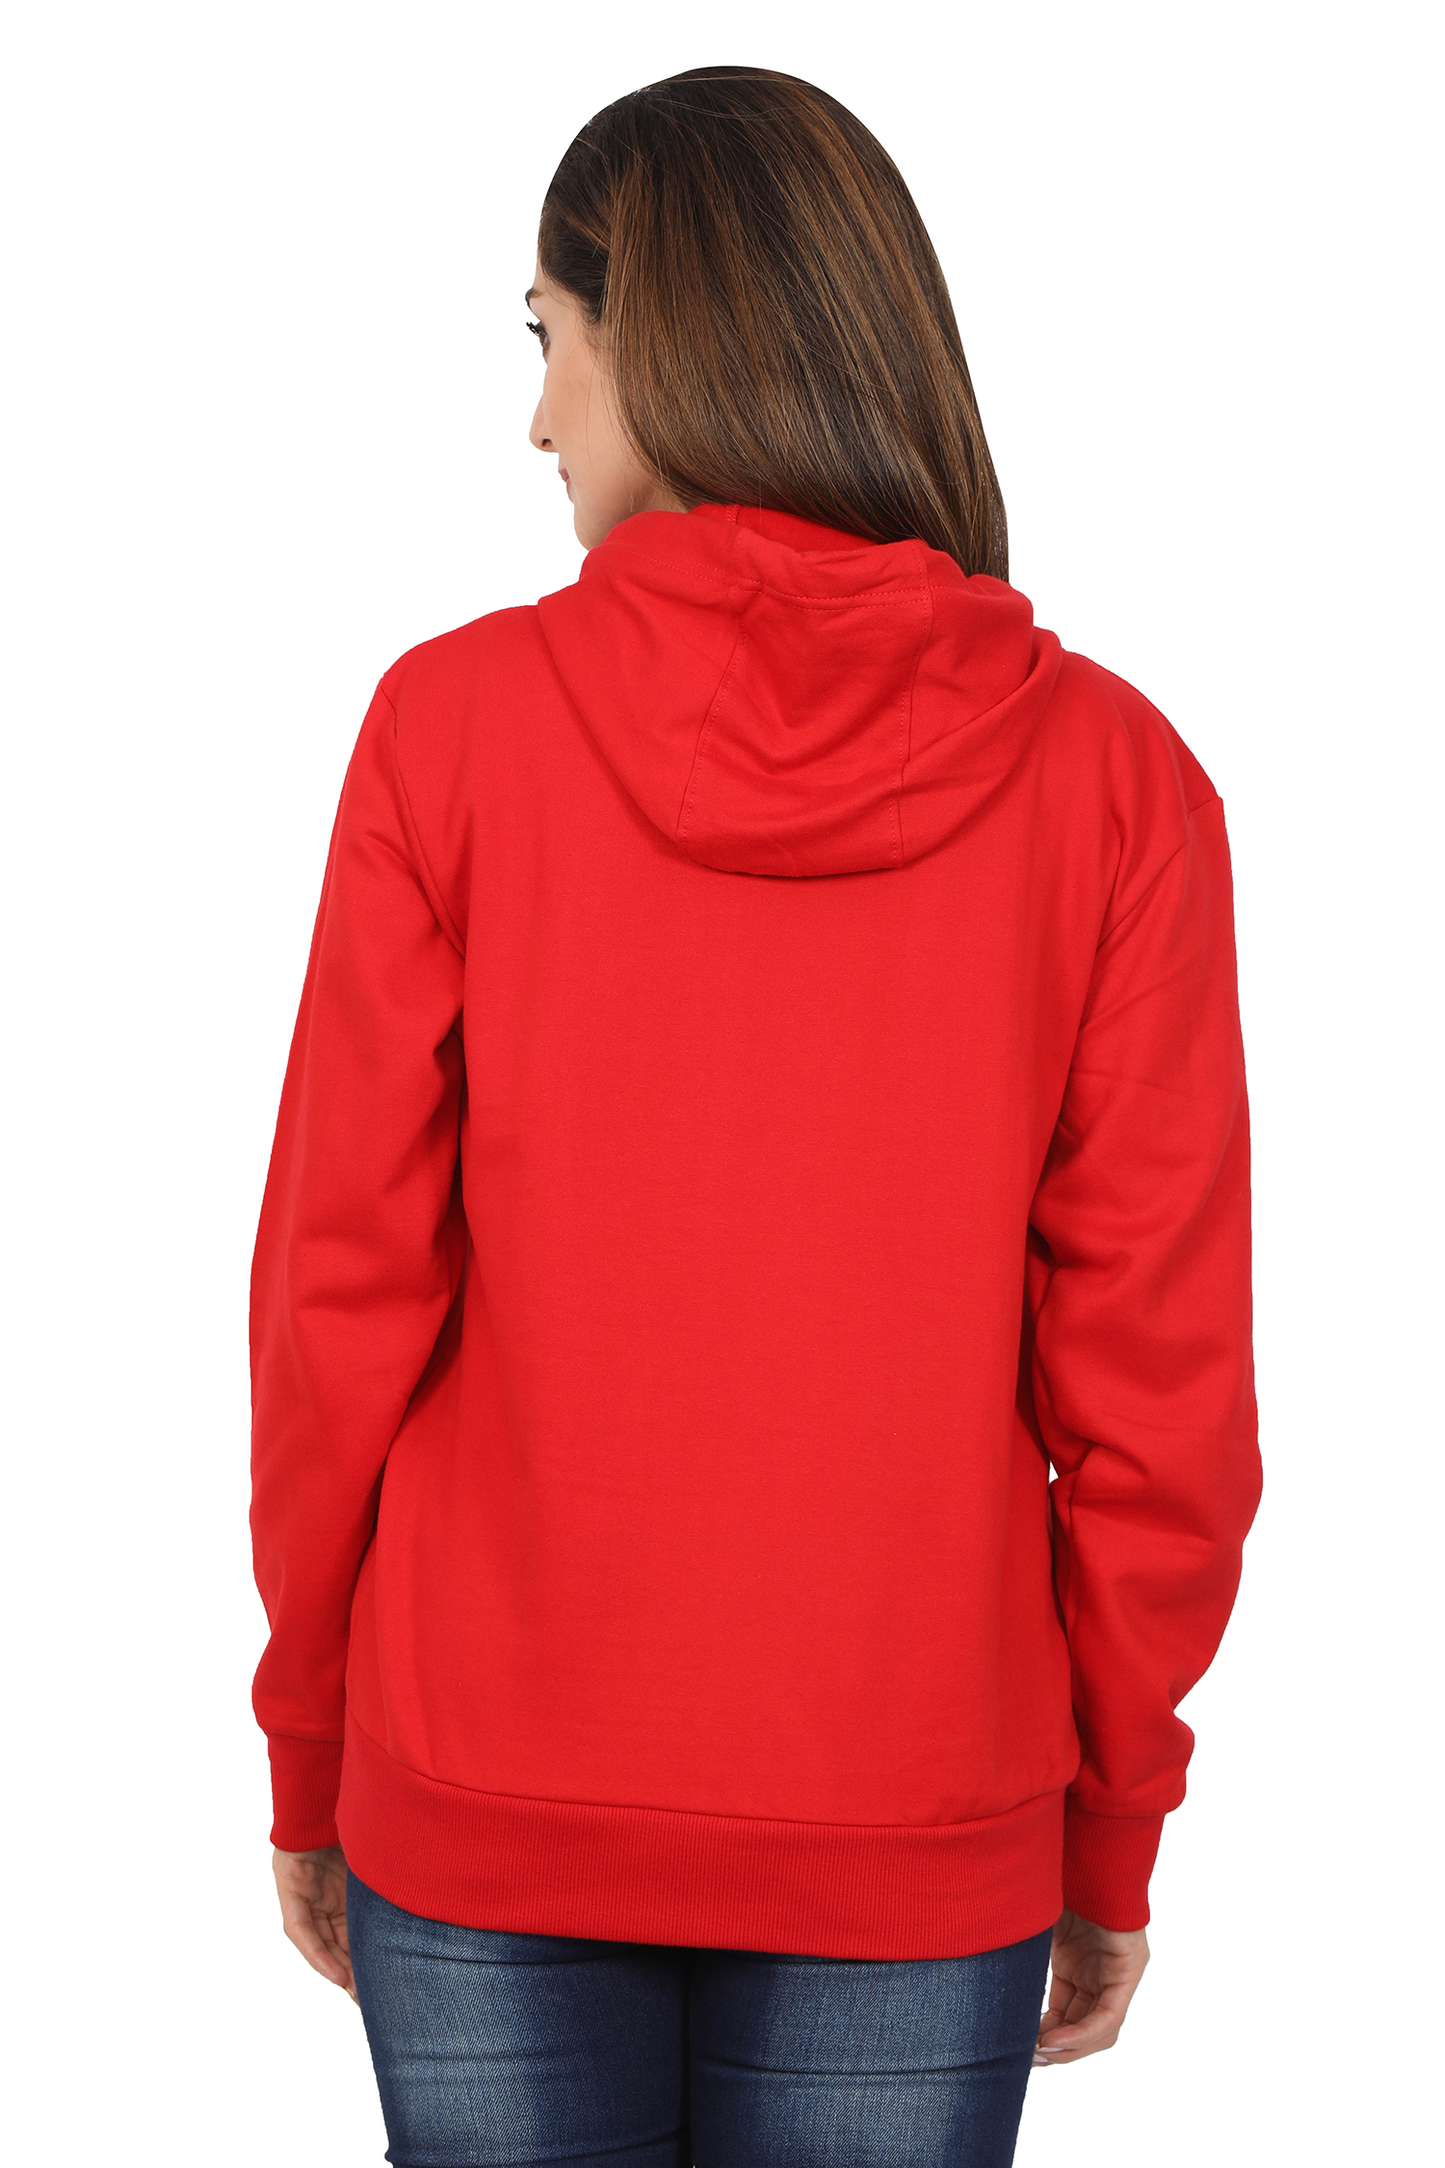 Plain Red Hoodie For Women